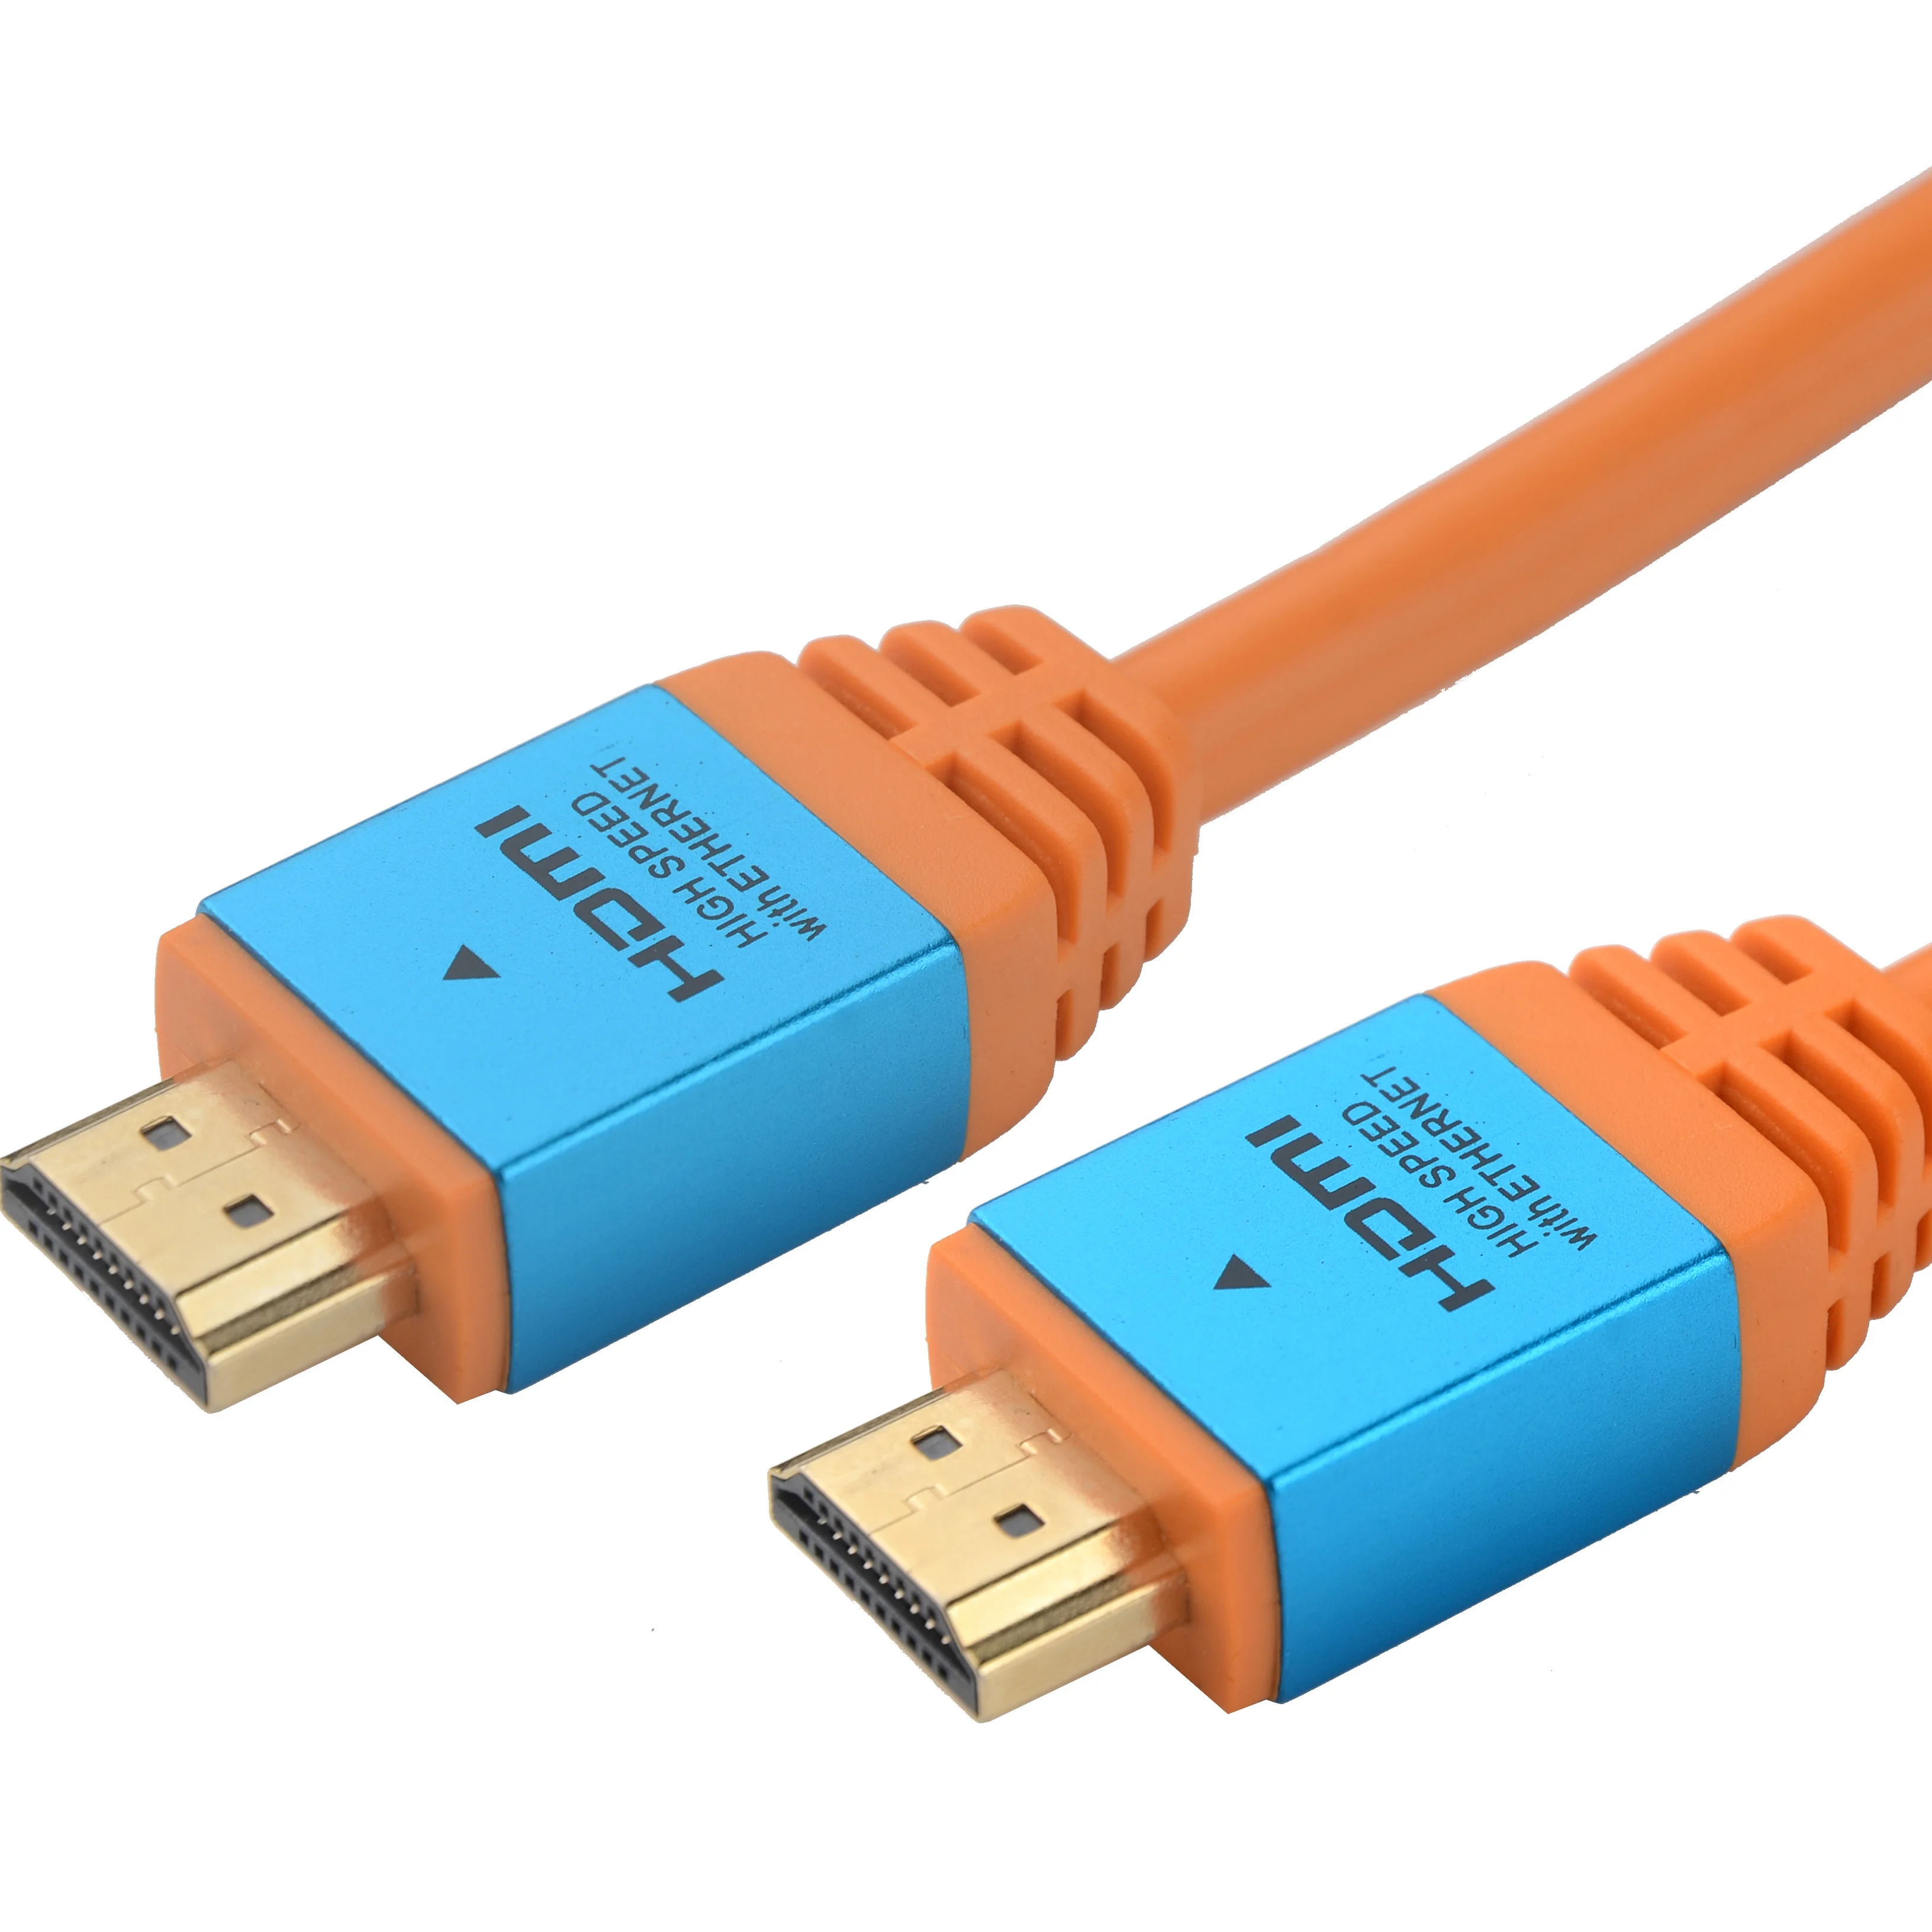 premium HDMI cable 2.0 HDMI male to HDMI male Cable support 4K@60Hz - idealCable.net